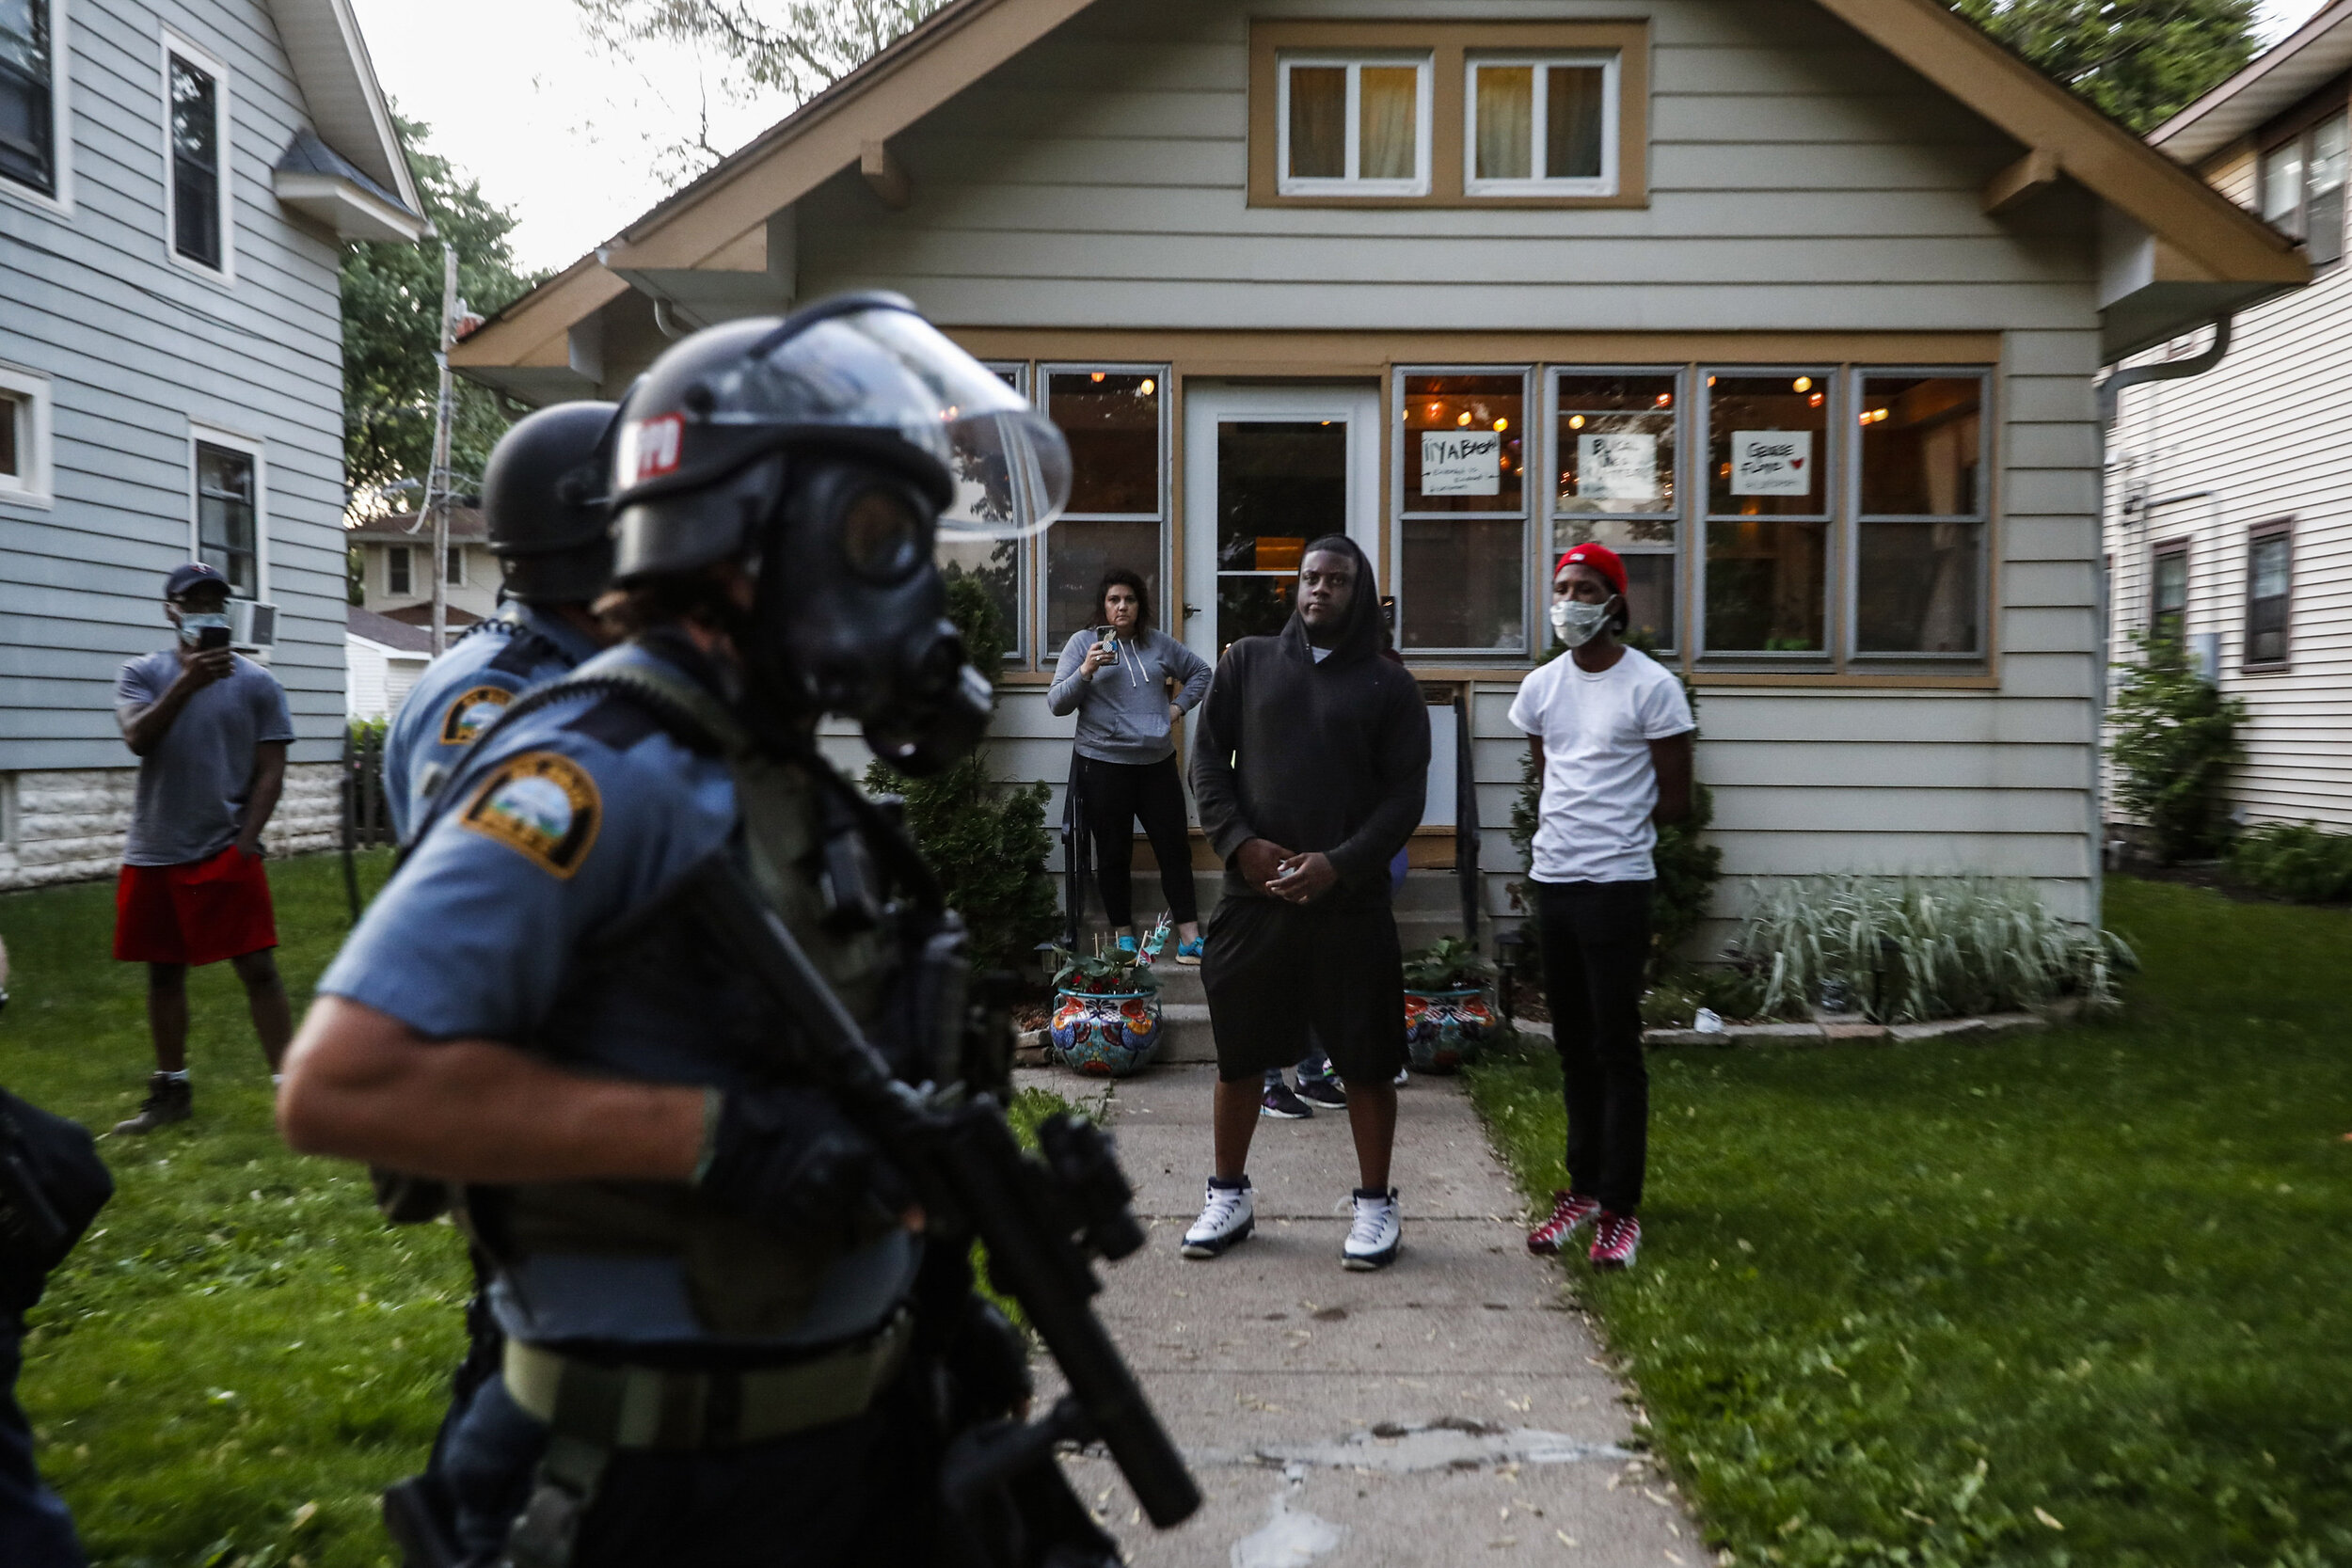  Bystanders watch as police walk down a street May 28, 2020, in St. Paul, Minn. Protests over the death of George Floyd, a black man who died in police custody, broke out in Minneapolis for a third straight night. (AP Photo/John Minchillo) 